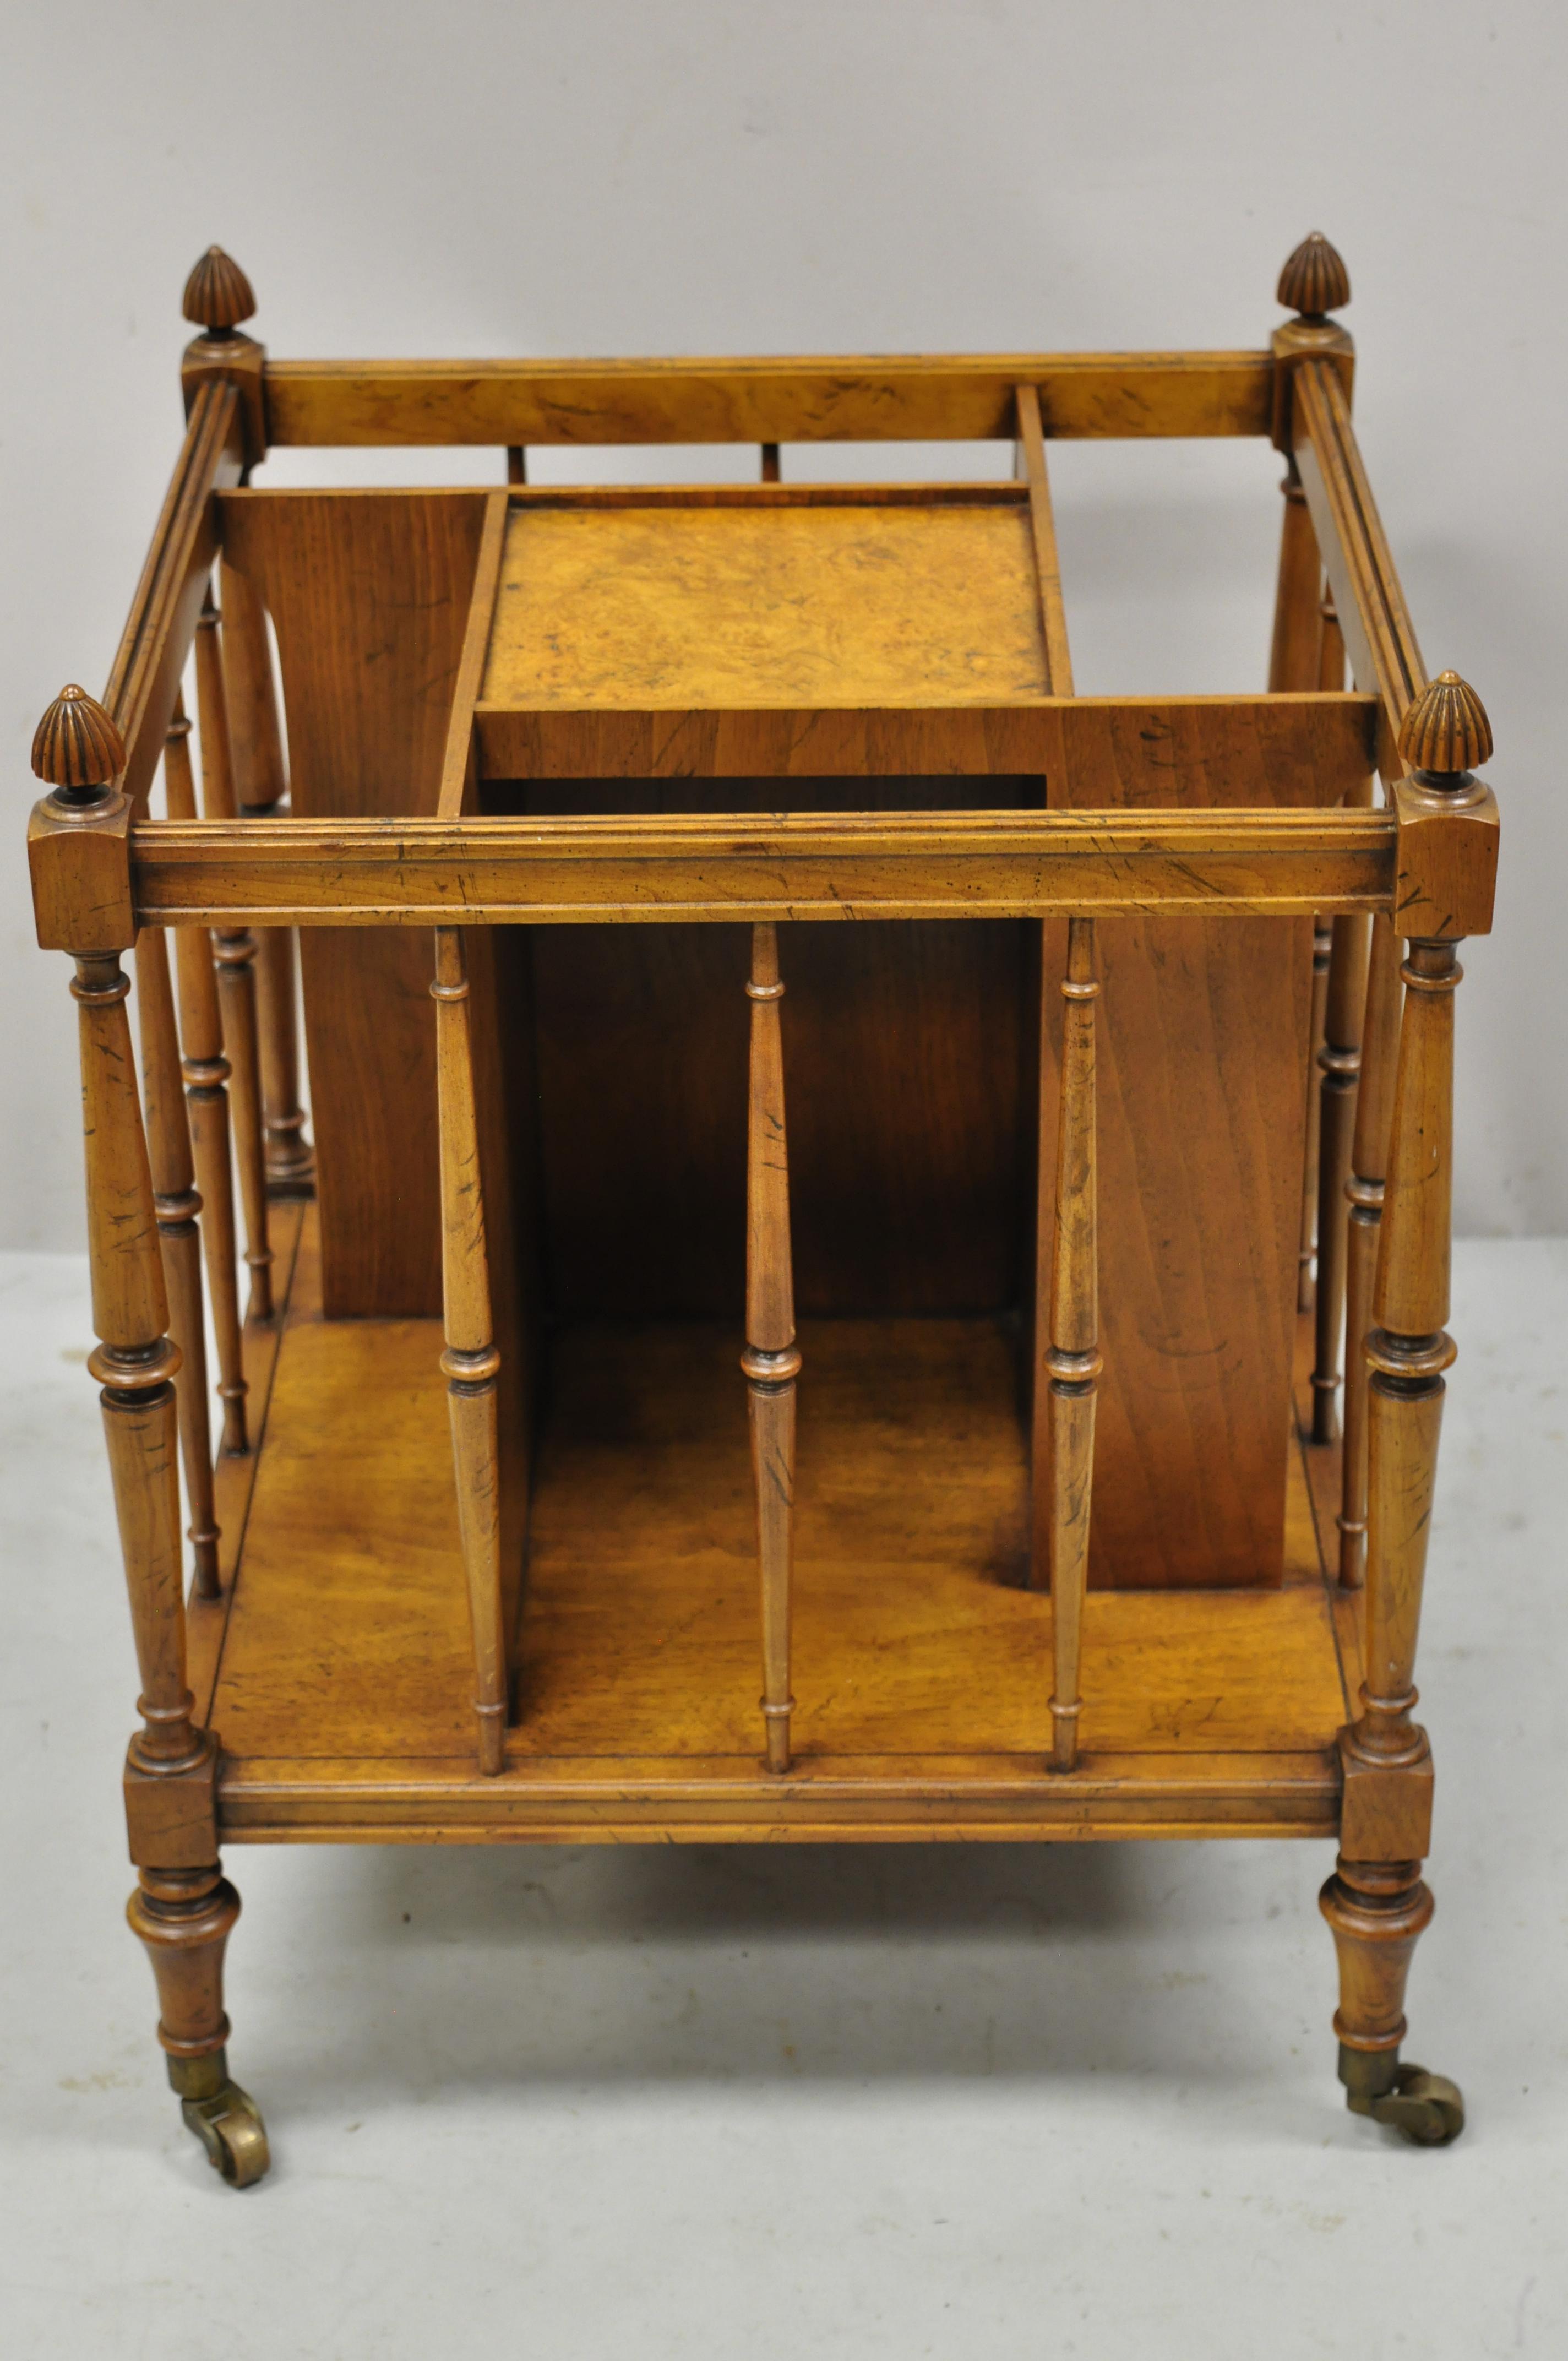 Baker English Regency burl wood canterbury magazine rack stand on wheels. Item features brass rolling casters, beautiful wood grain, original stamp, quality American craftsmanship, great style and form. Circa Mid 20th Century. Measurements: 23